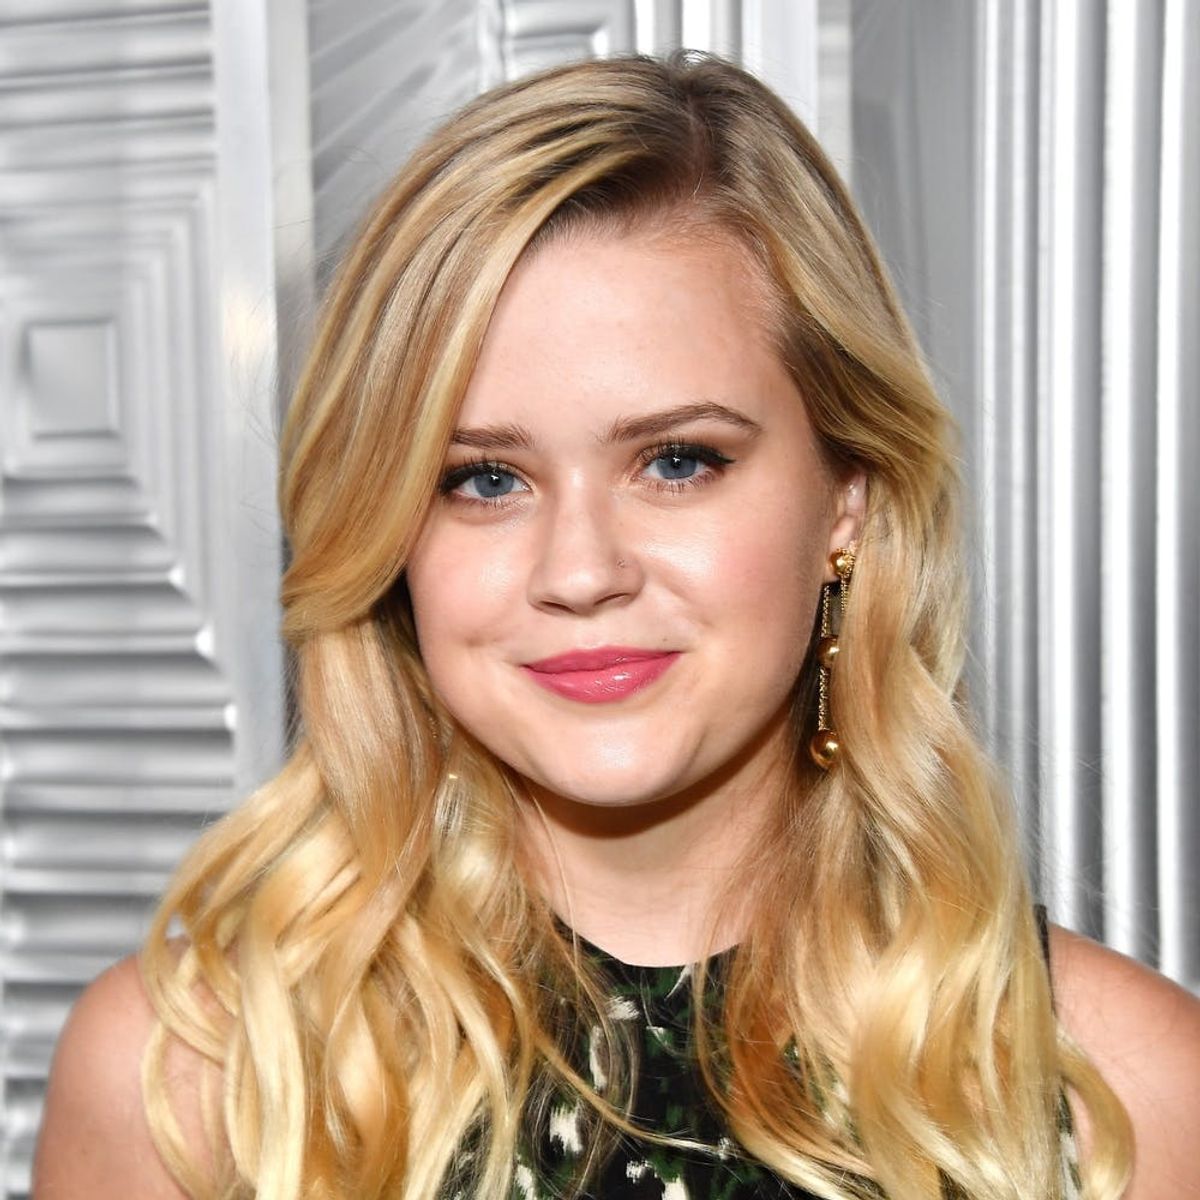 Ava Phillippe Had a Total “Princess Diaries” Moment in Her Breathtaking Debutante Ball Gown